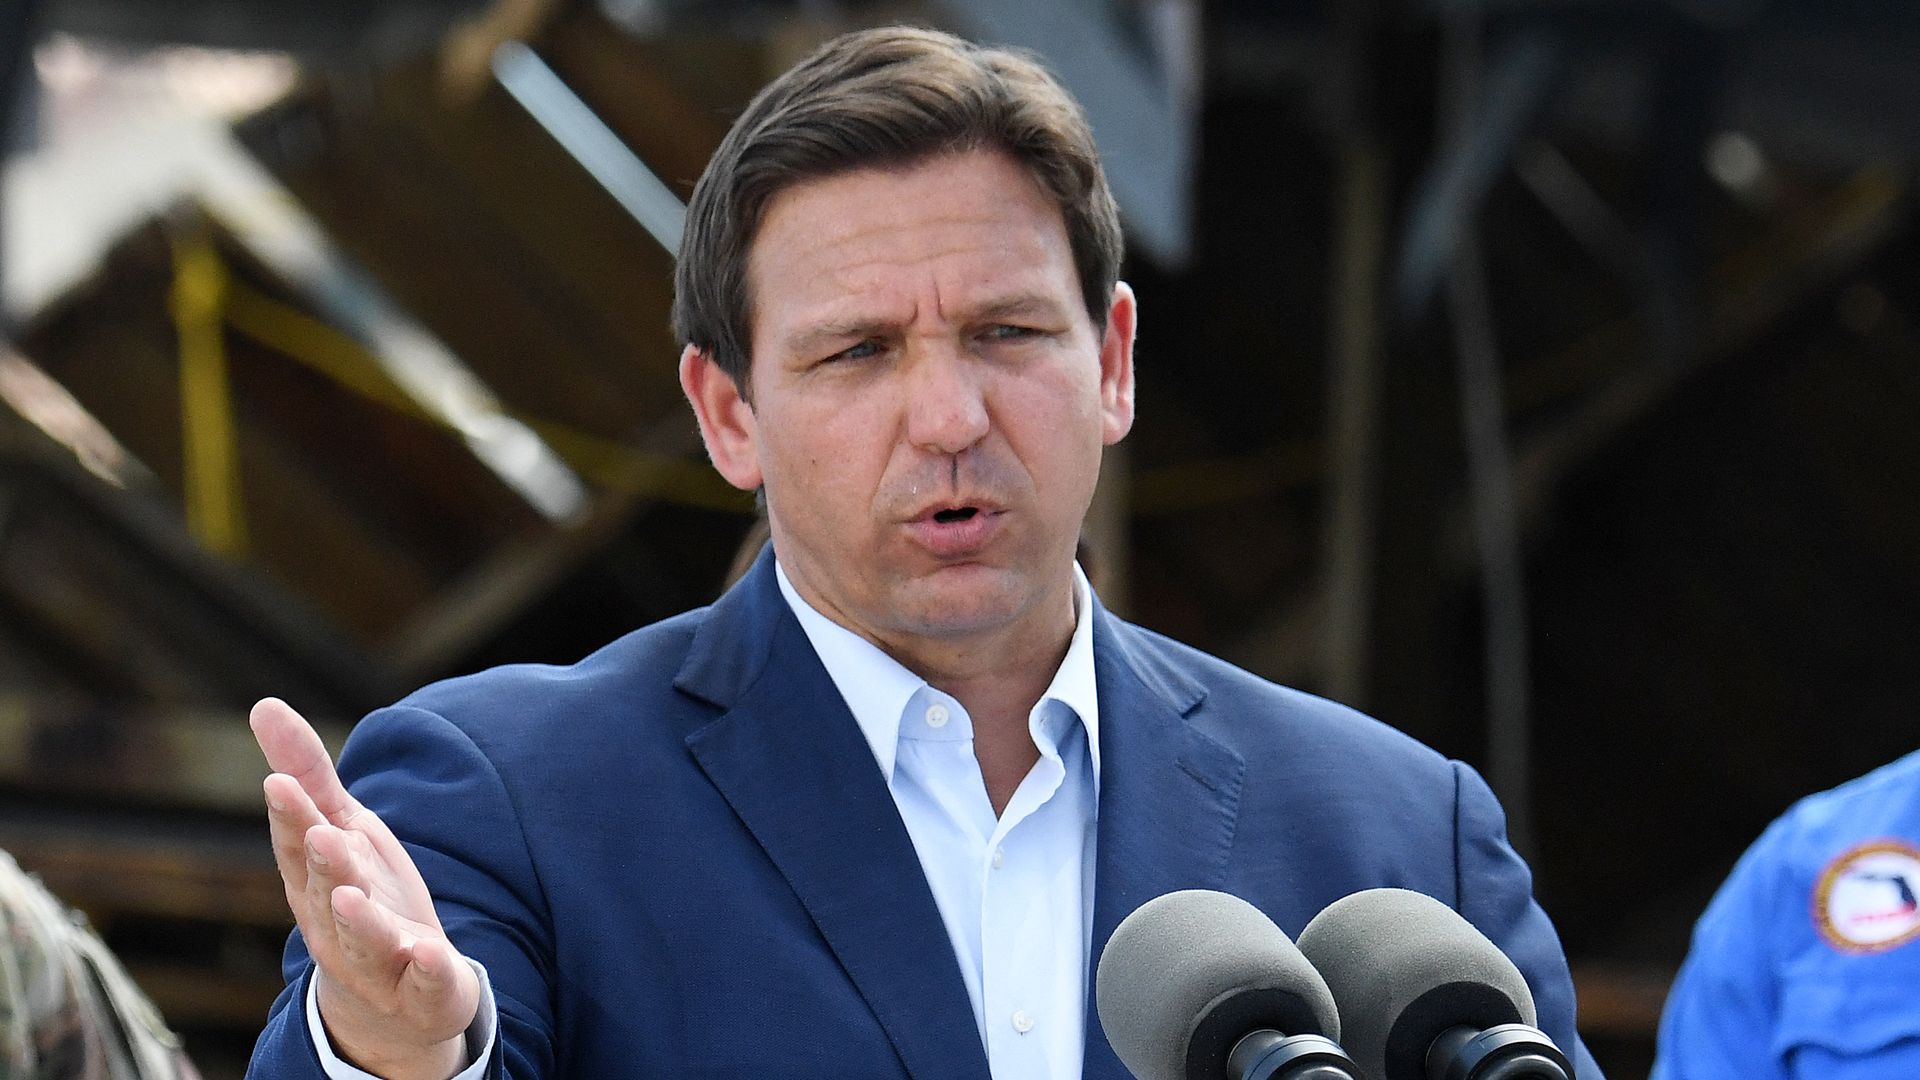 Florida Governor Ron DeSantis speaks in a neighborhood impacted by Hurricane Ian at Fisherman's Wharf in Fort Myers, Florida, on October 5, 2022